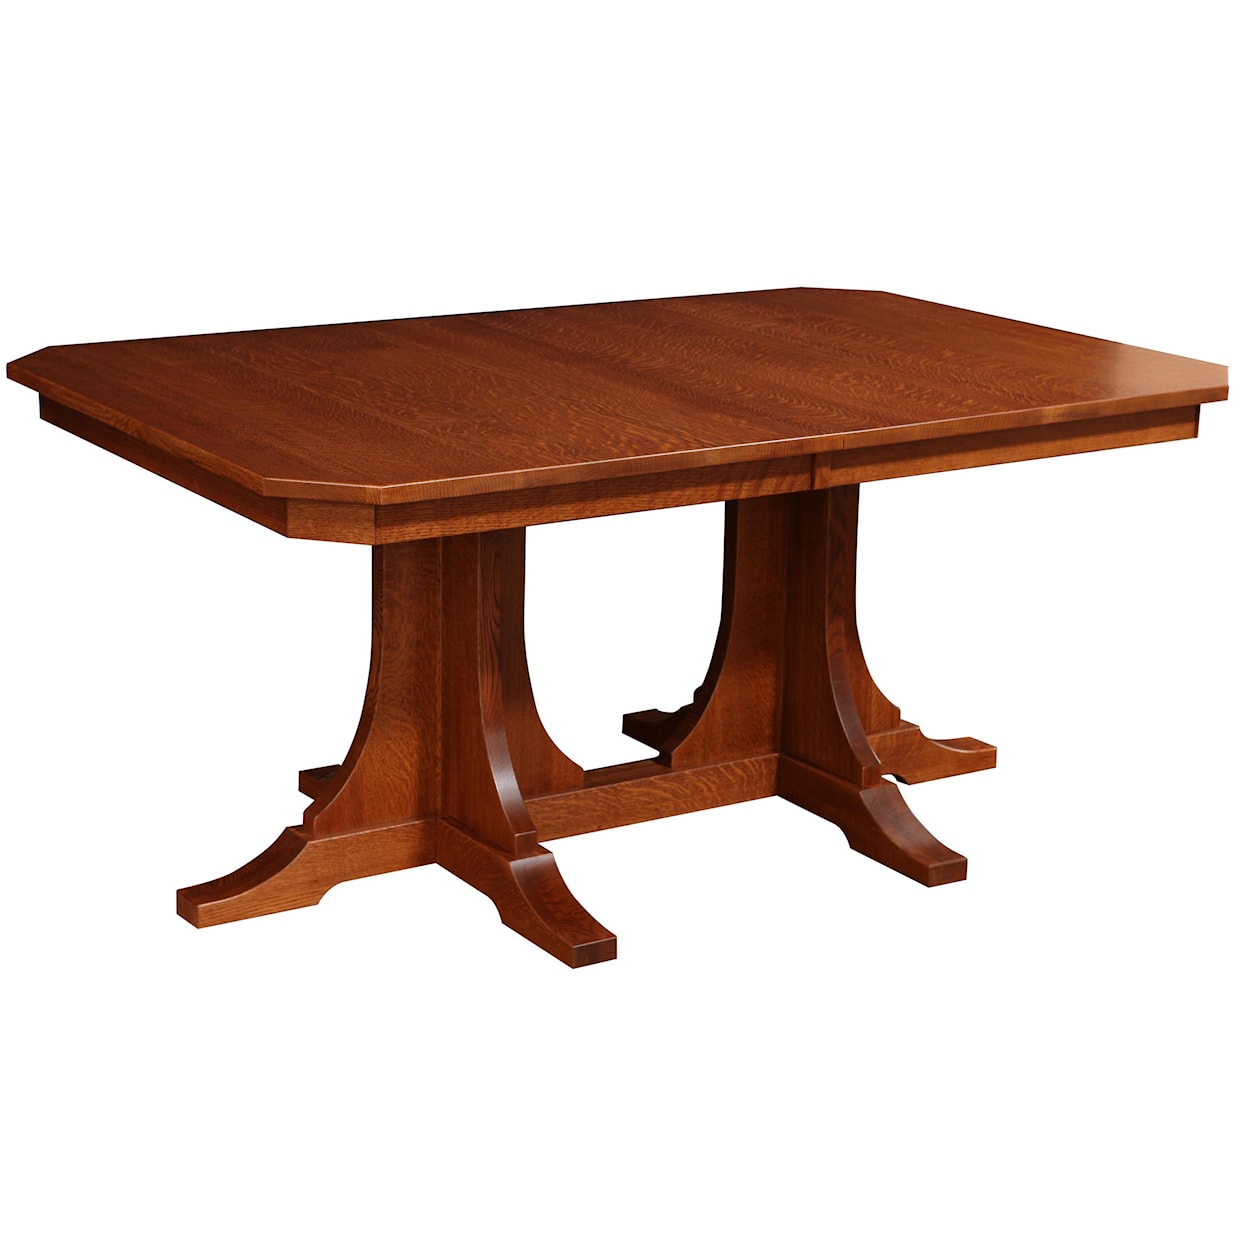 Trailway Wood Copper Canyon Rectangular Dining Table